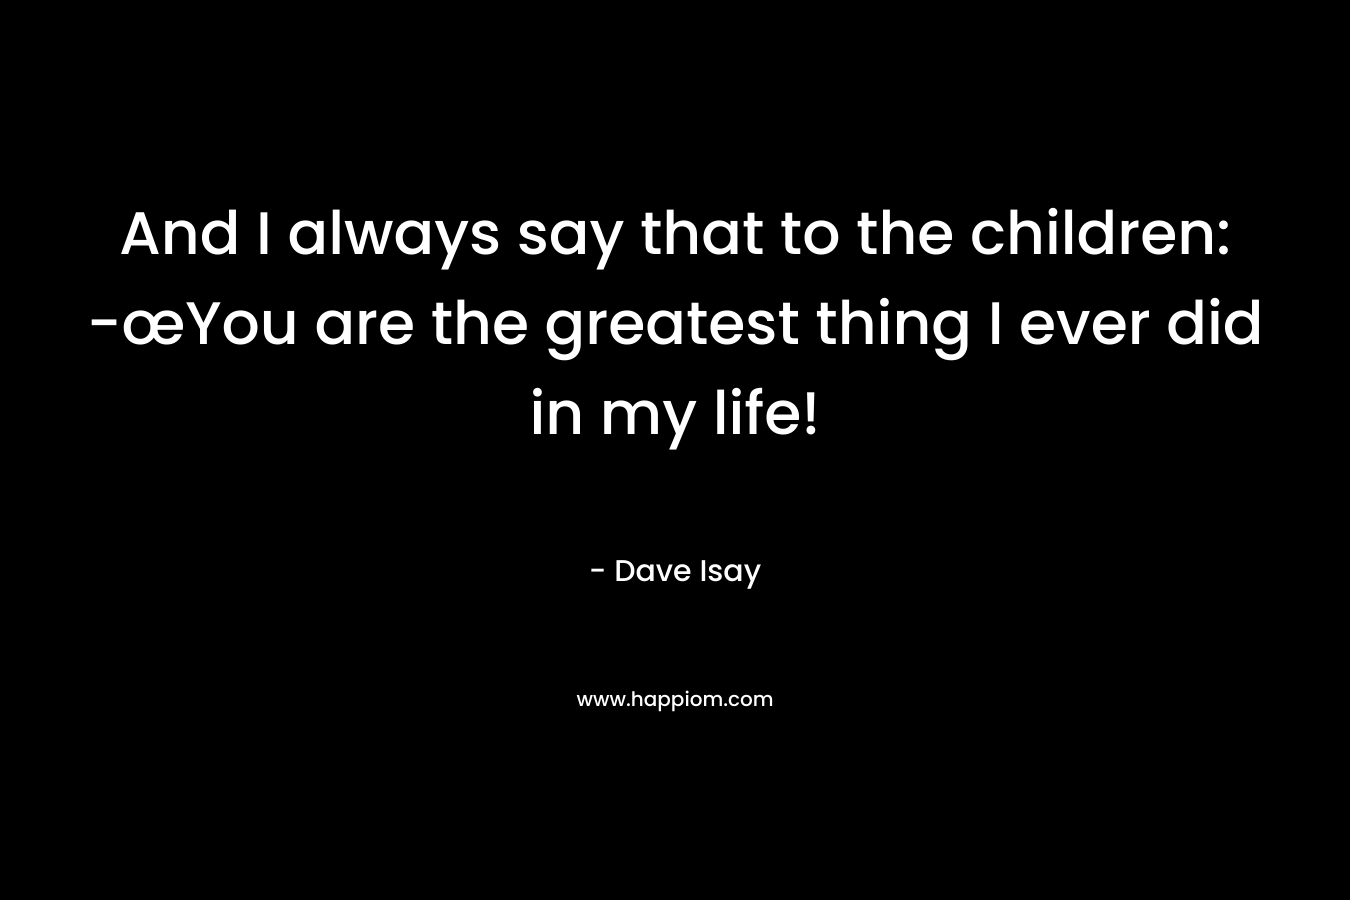 And I always say that to the children: -œYou are the greatest thing I ever did in my life!